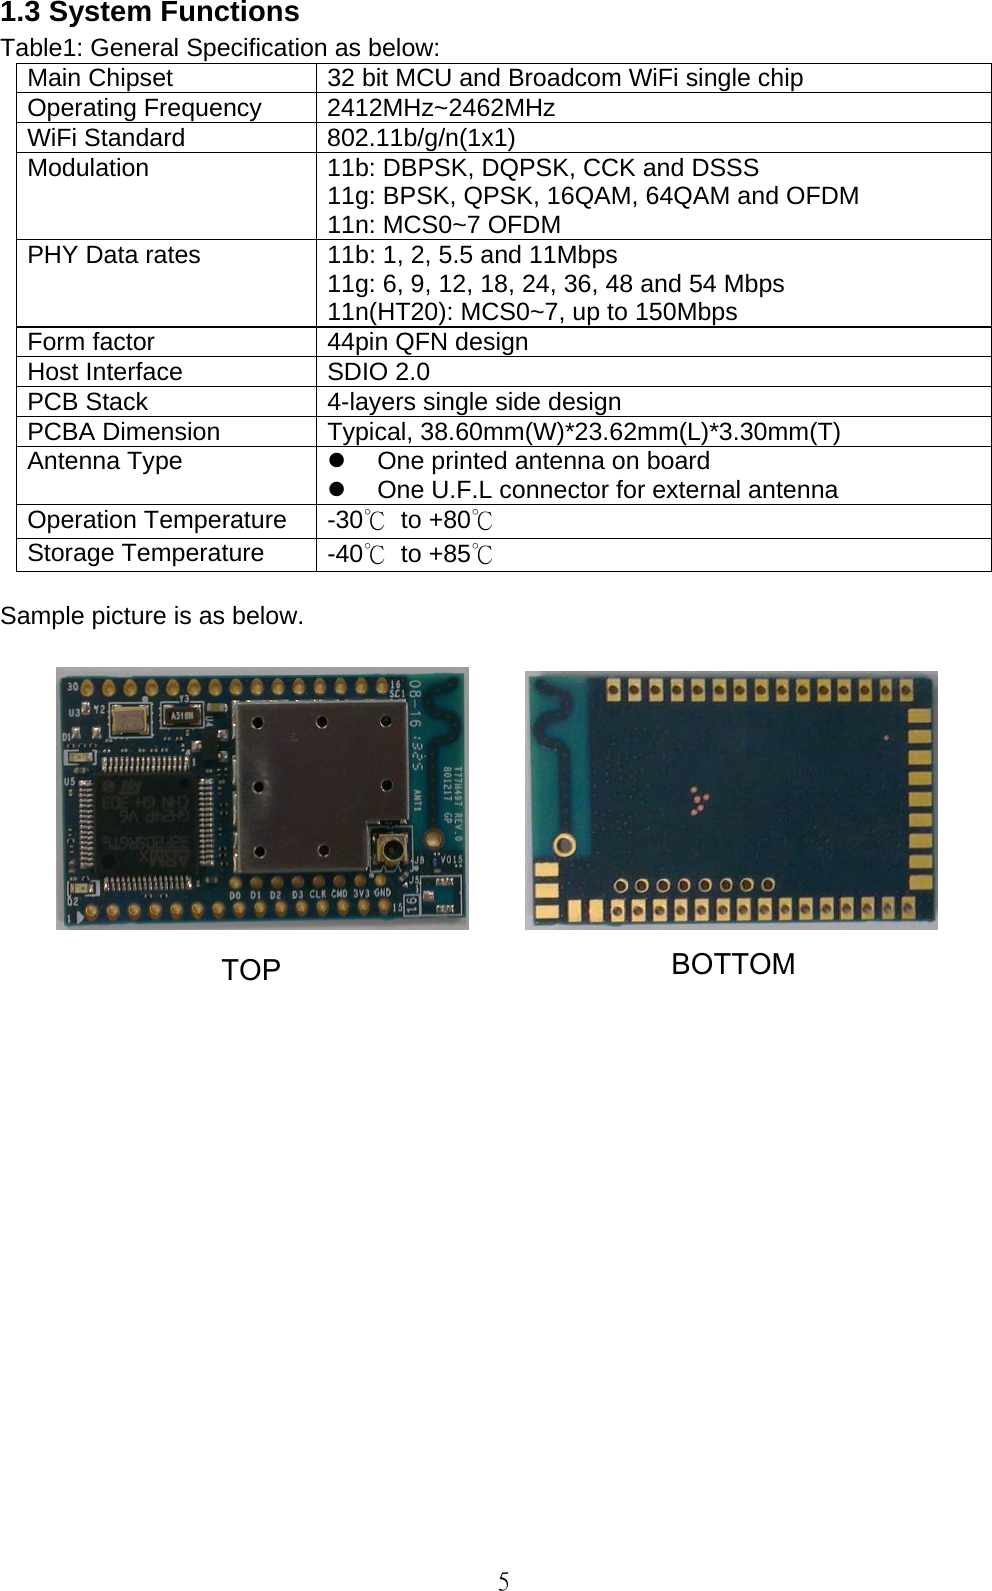   5 1.3 System Functions Table1: General Specification as below: Main Chipset  32 bit MCU and Broadcom WiFi single chip Operating Frequency  2412MHz~2462MHz WiFi Standard  802.11b/g/n(1x1) Modulation 11b: DBPSK, DQPSK, CCK and DSSS 11g: BPSK, QPSK, 16QAM, 64QAM and OFDM 11n: MCS0~7 OFDM PHY Data rates  11b: 1, 2, 5.5 and 11Mbps 11g: 6, 9, 12, 18, 24, 36, 48 and 54 Mbps 11n(HT20): MCS0~7, up to 150Mbps Form factor  44pin QFN design Host Interface  SDIO 2.0 PCB Stack  4-layers single side design PCBA Dimension  Typical, 38.60mm(W)*23.62mm(L)*3.30mm(T) Antenna Type    One printed antenna on board   One U.F.L connector for external antenna Operation Temperature  -30℃ to +80℃  Storage Temperature  -40℃ to +85℃  Sample picture is as below.                BOTTOM TOP 